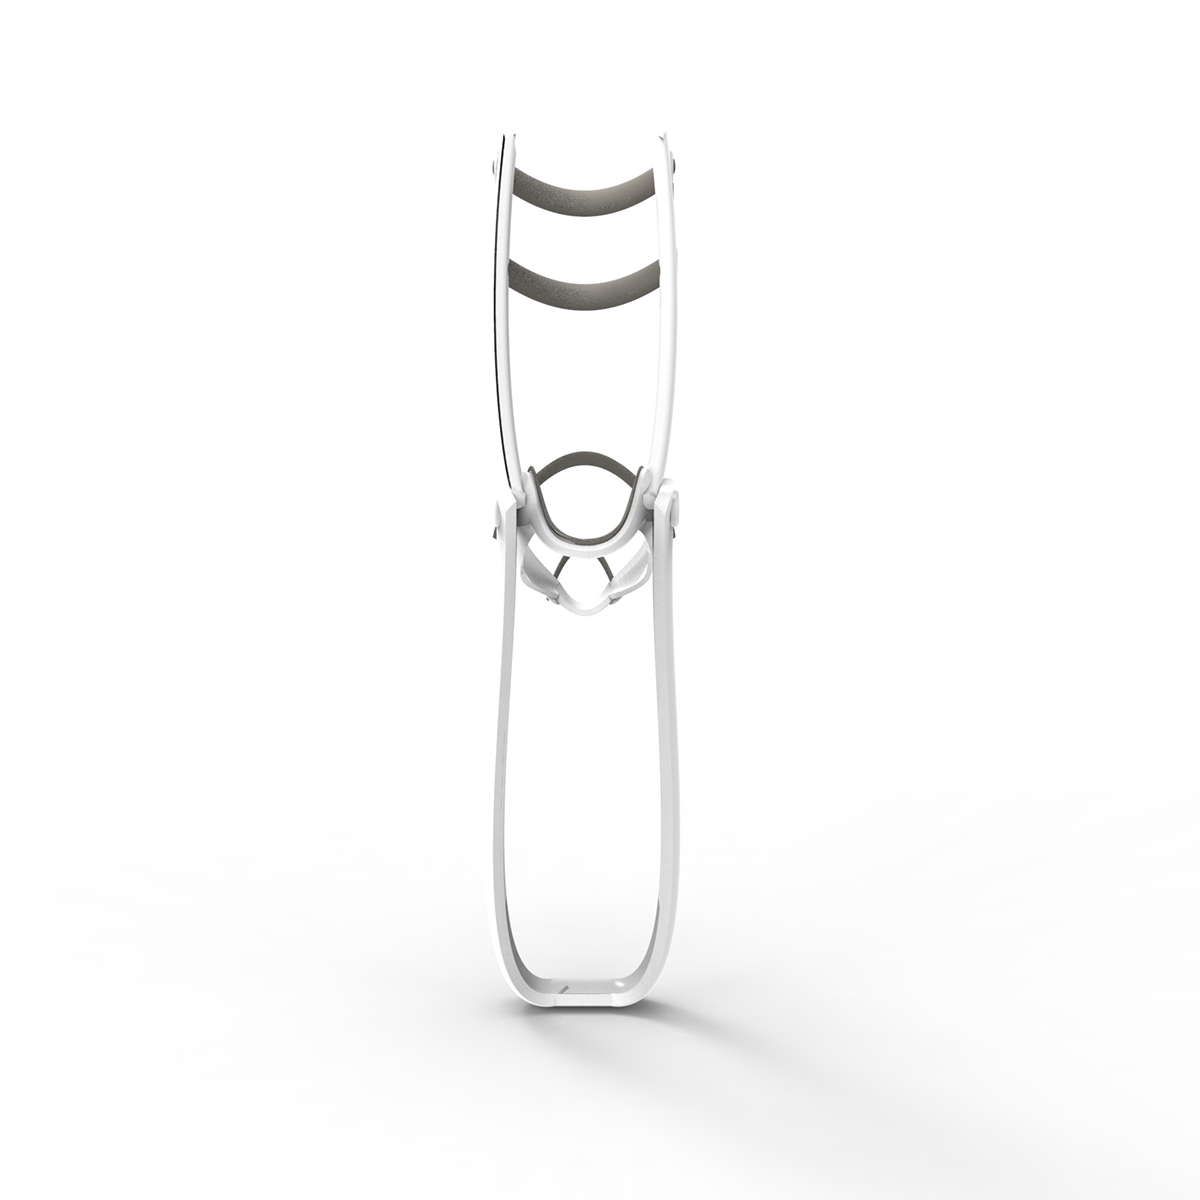 crutch redesign Health youth healthcare